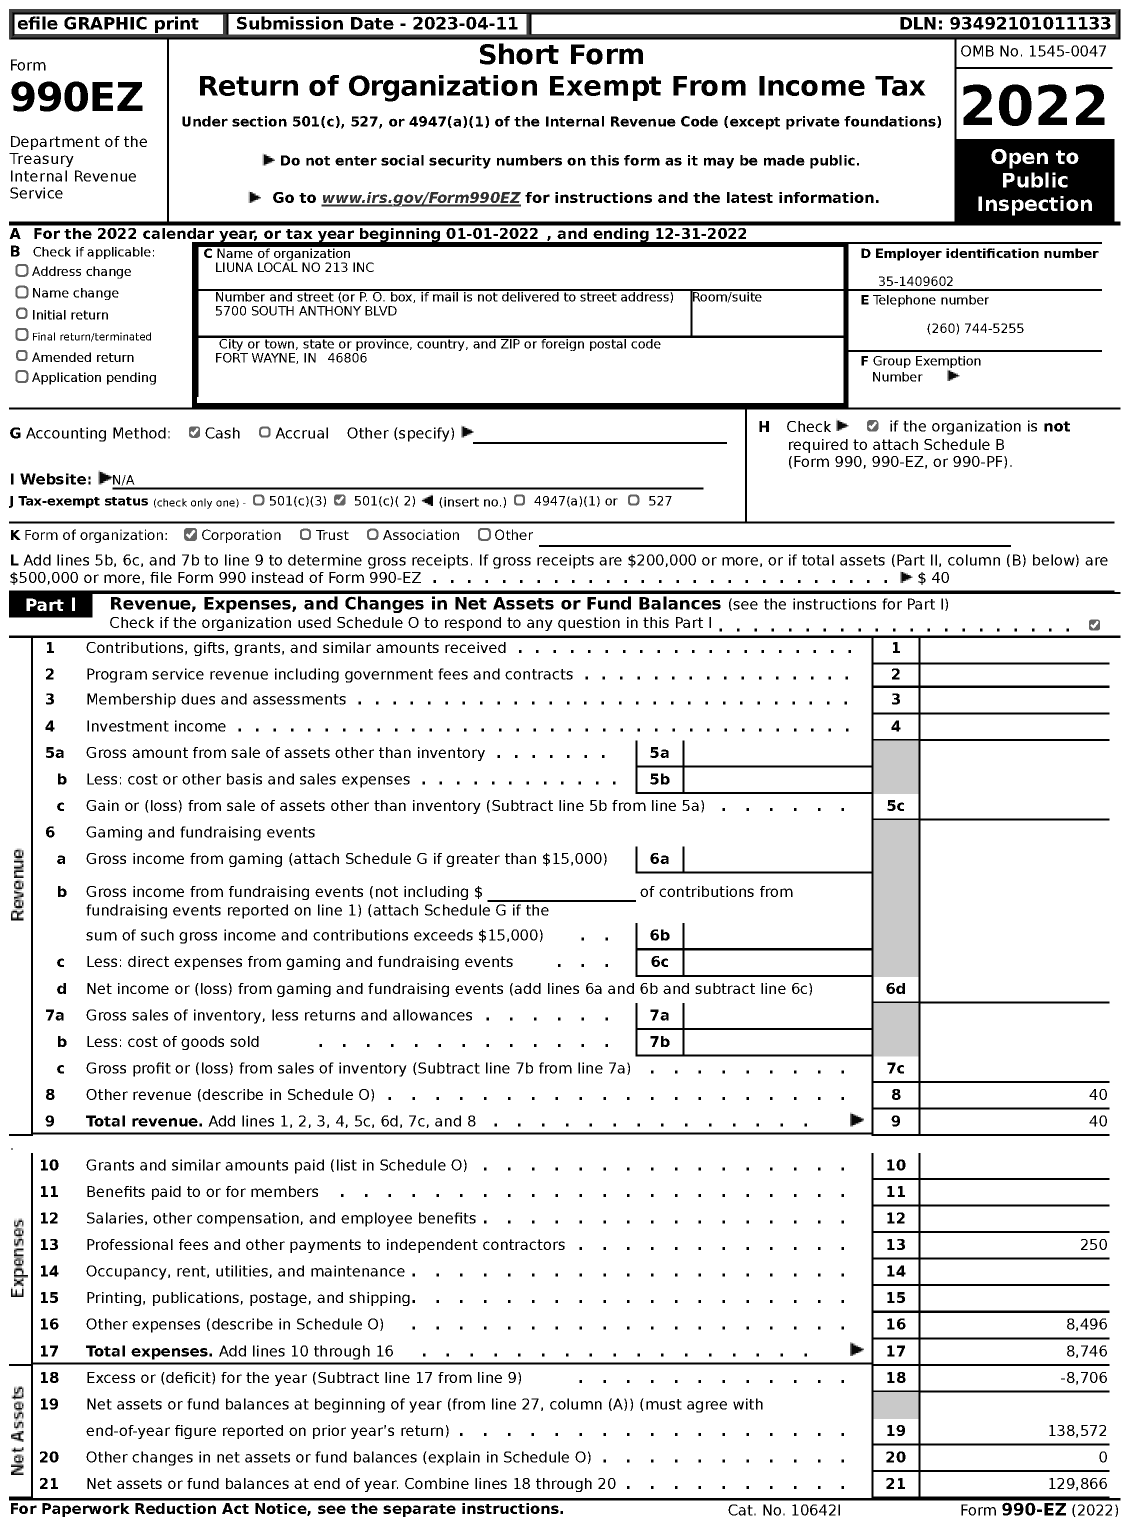 Image of first page of 2022 Form 990EZ for Liuna Local No 213